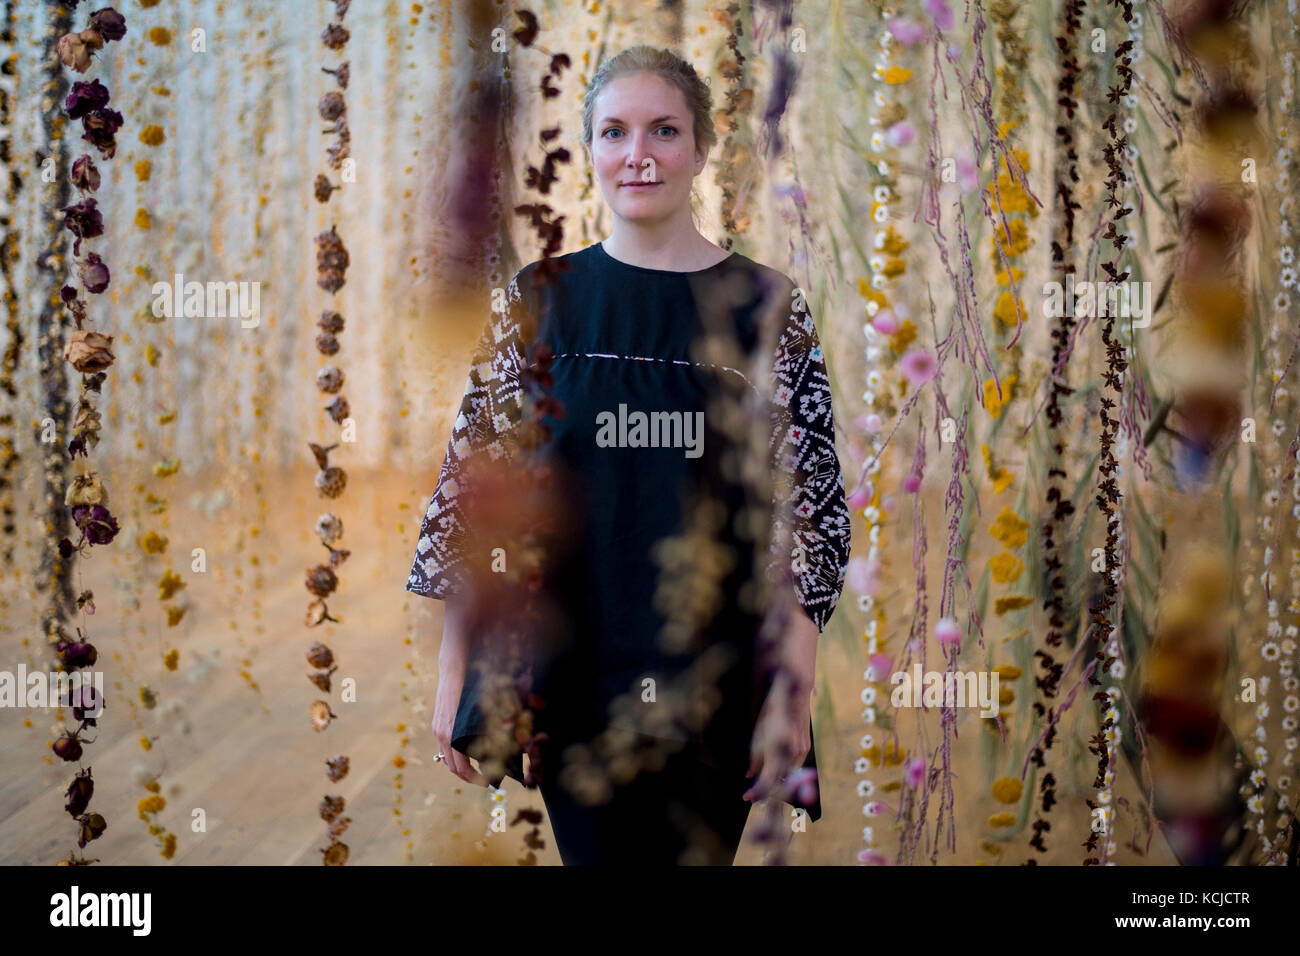 Artist Rebecca Louise Law with her new hanging installation 'Life in Death' featuring 375,000 flowers, at the Shirley Sherwood Gallery of Botanical Art, part of Artful Autumn at Kew Gardens in south west London. Stock Photo